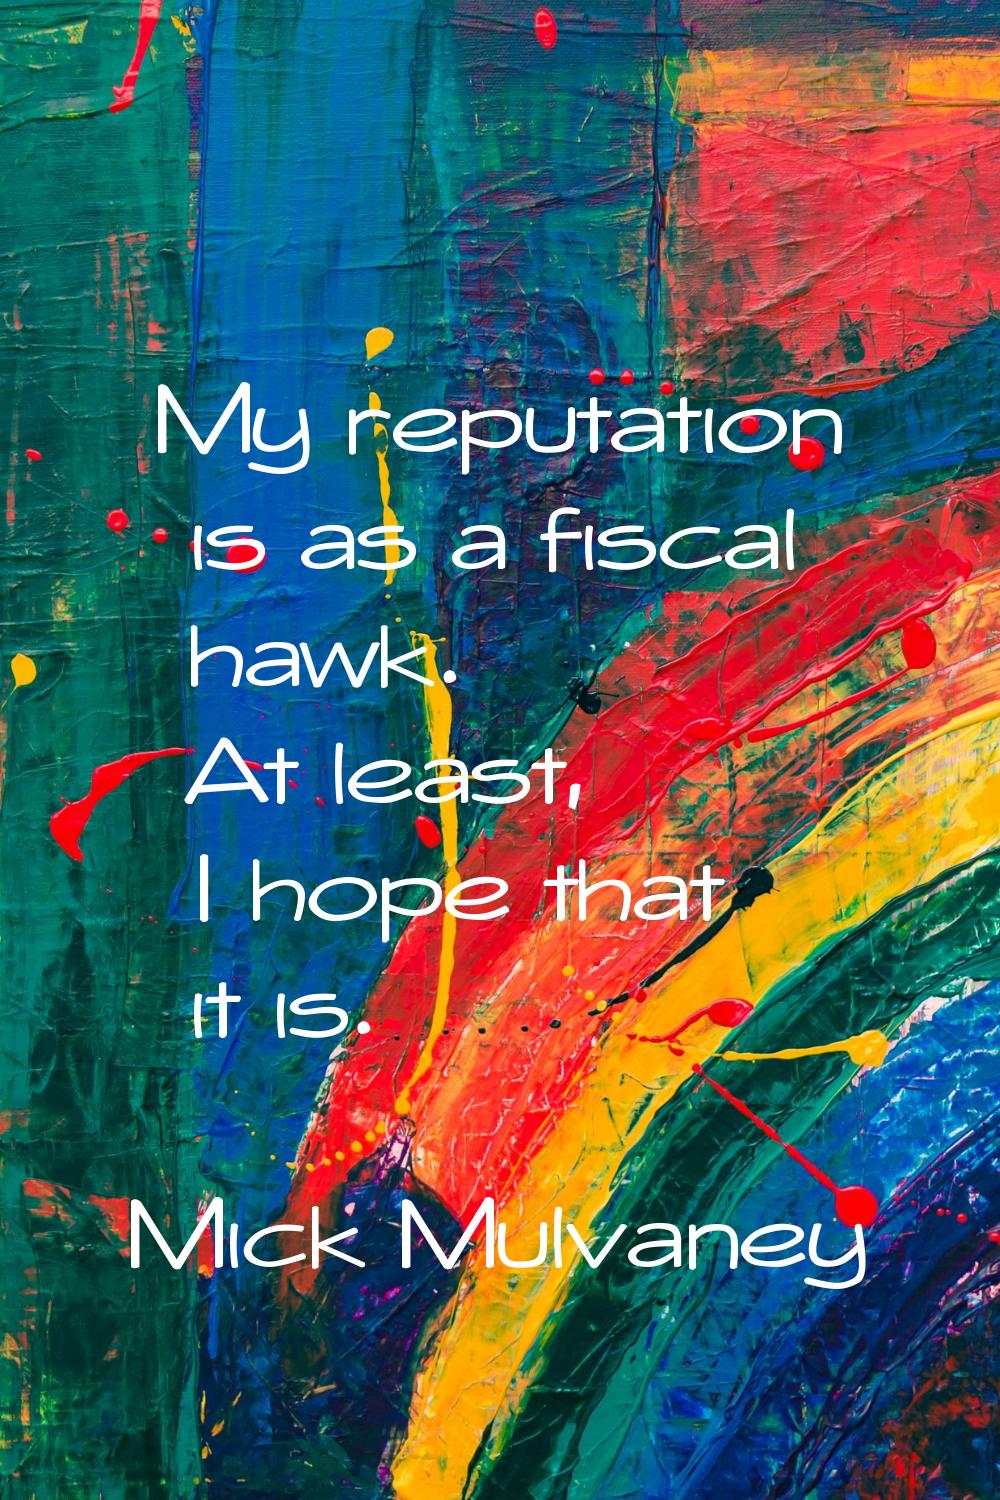 My reputation is as a fiscal hawk. At least, I hope that it is.